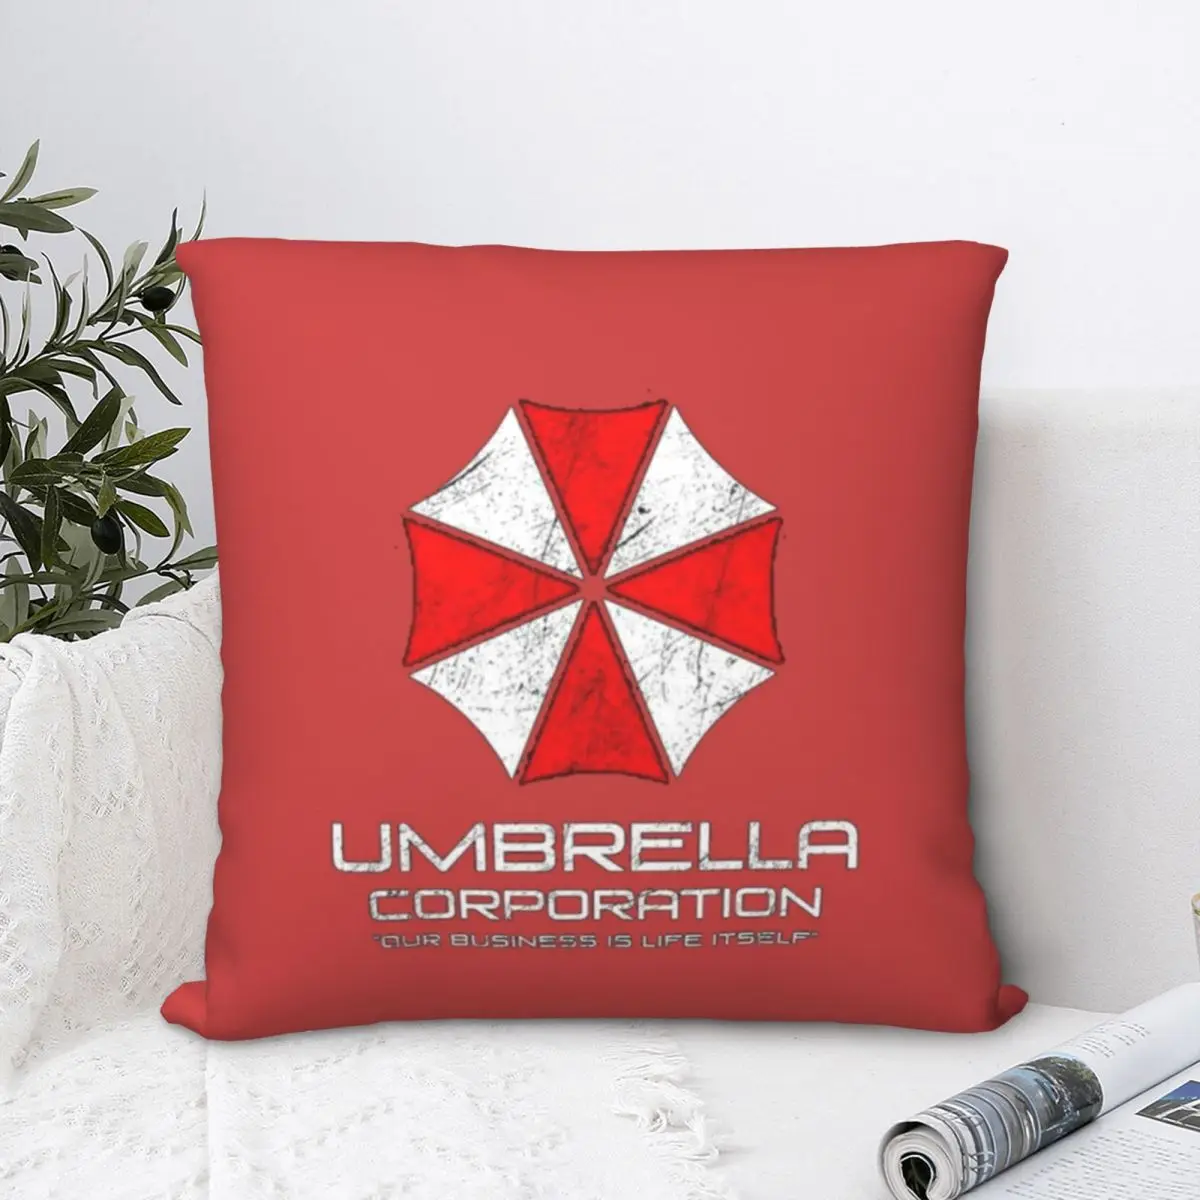 

Umbrella Corporation Corp Pillowcase Double-sided Printing Polyester Cushion Cover Decorations Game Throw Pillow Case Cover Home